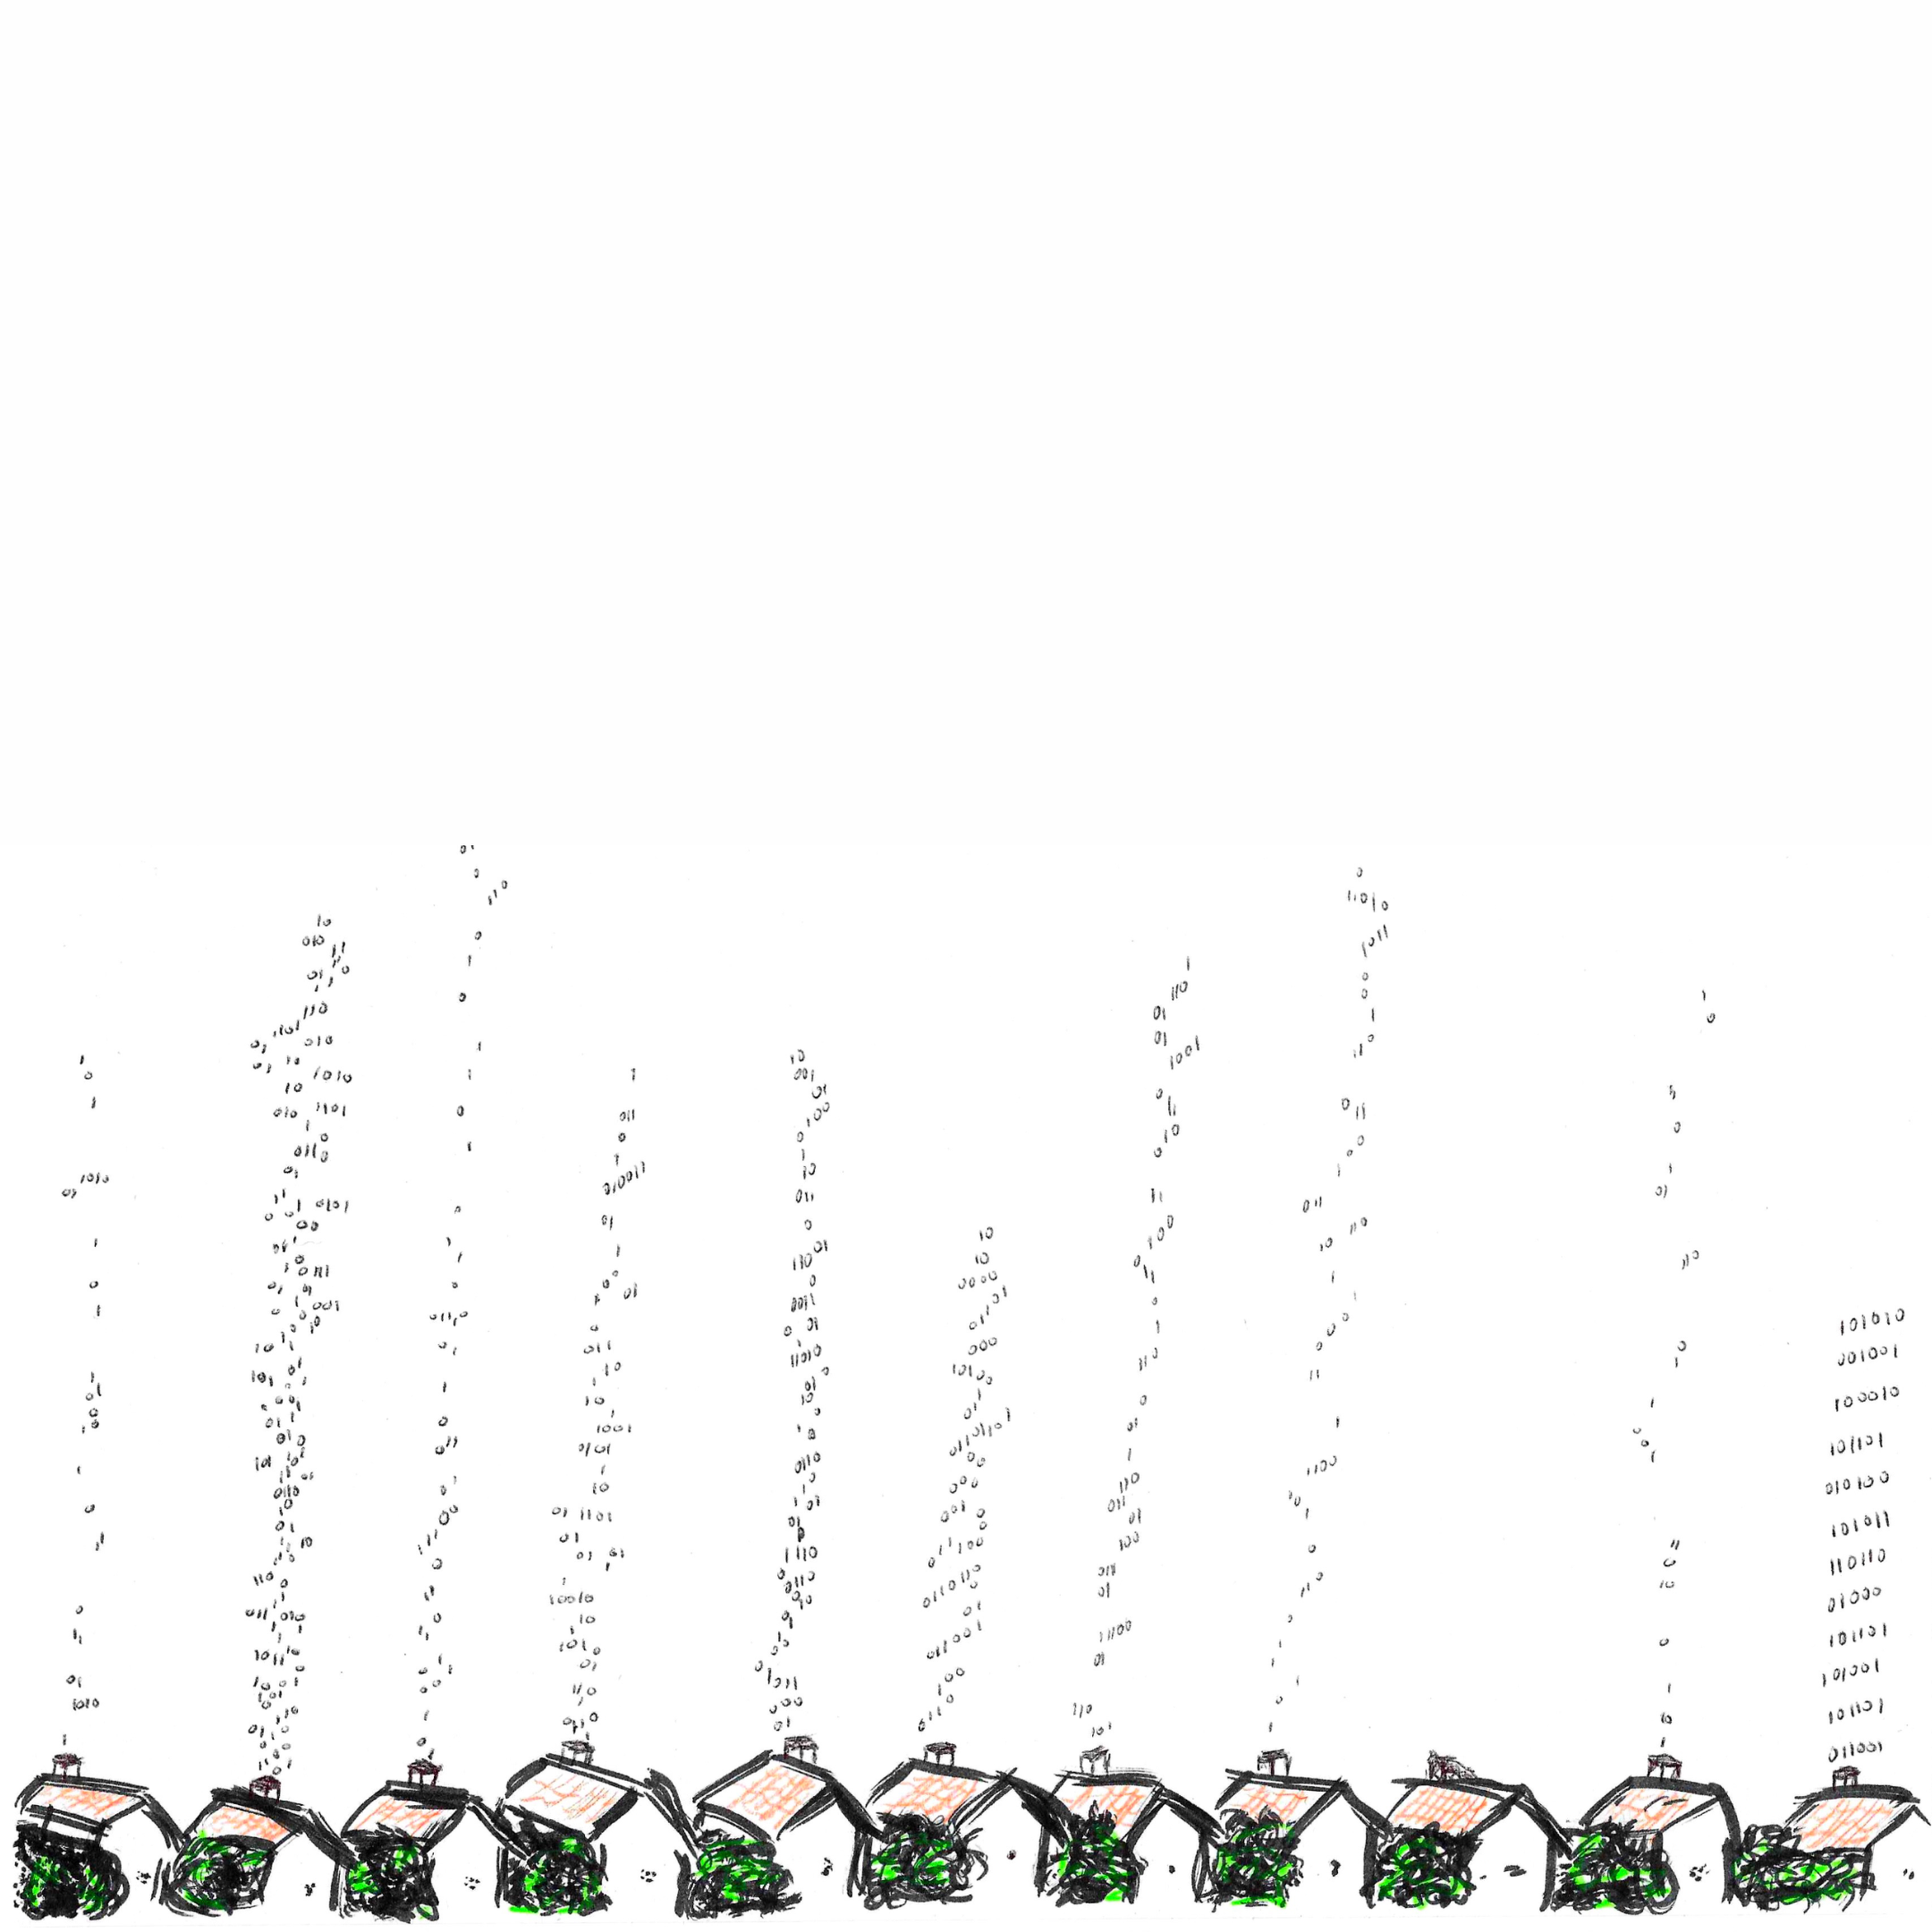 A hand drawn sketch in coloured pens depicts a small uniform row of houses at the bottom of the picture. From each of the houses, 0s and 1s representing digital data are floating up in plumes which look like smoke from the chimneys of the houses; but these are not uniform, therefore representing the different types of data from each house.